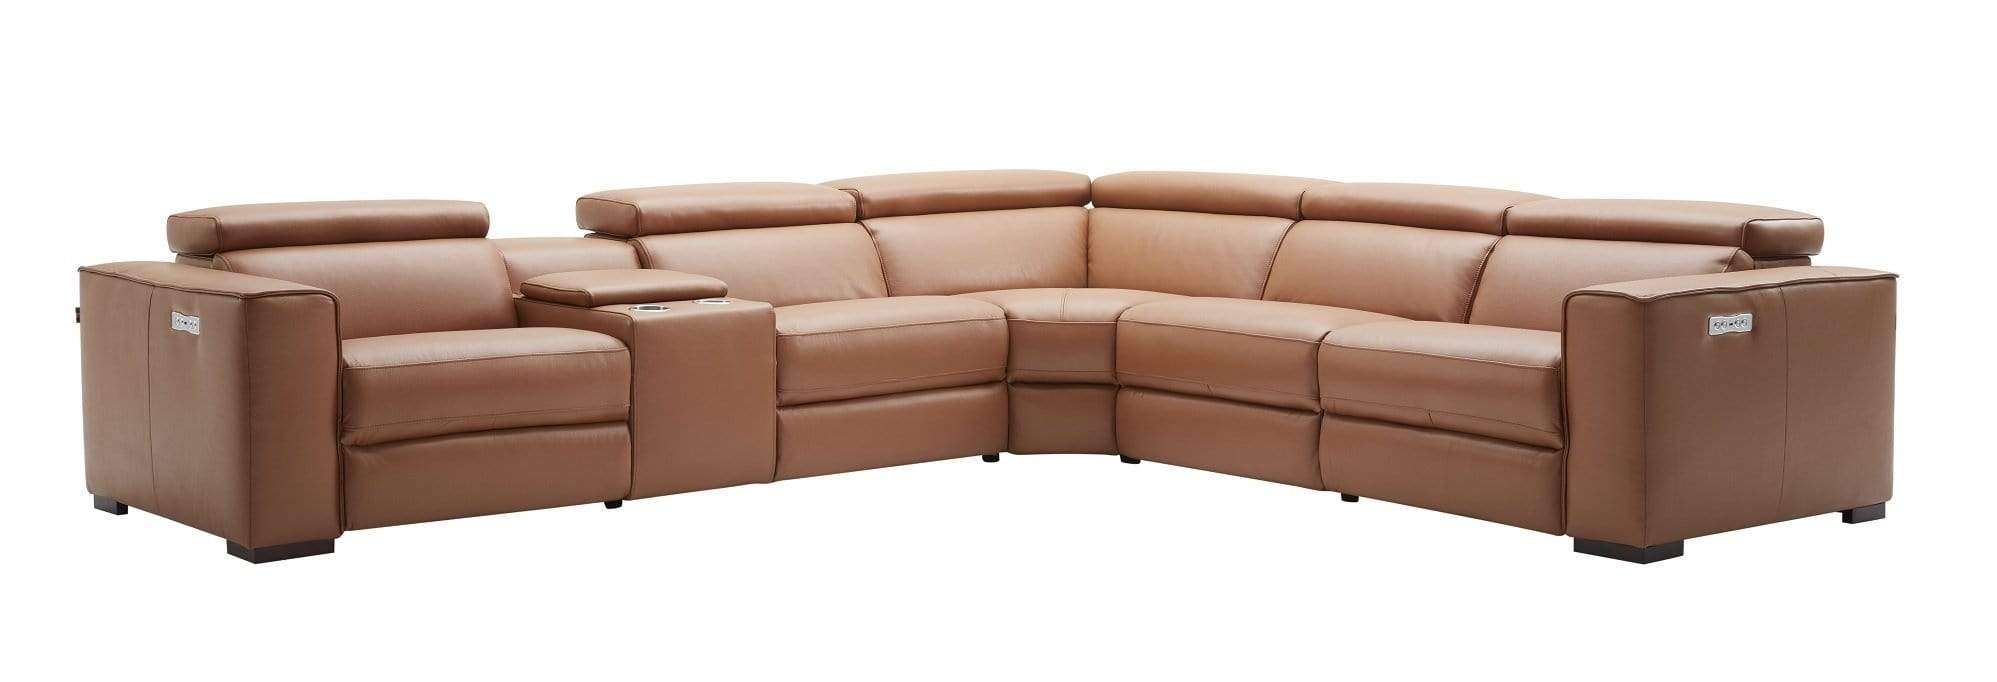 J and M Furniture Couches & Sofa Caramel / Left Picasso 6Pc Motion Sectional In Various Colors